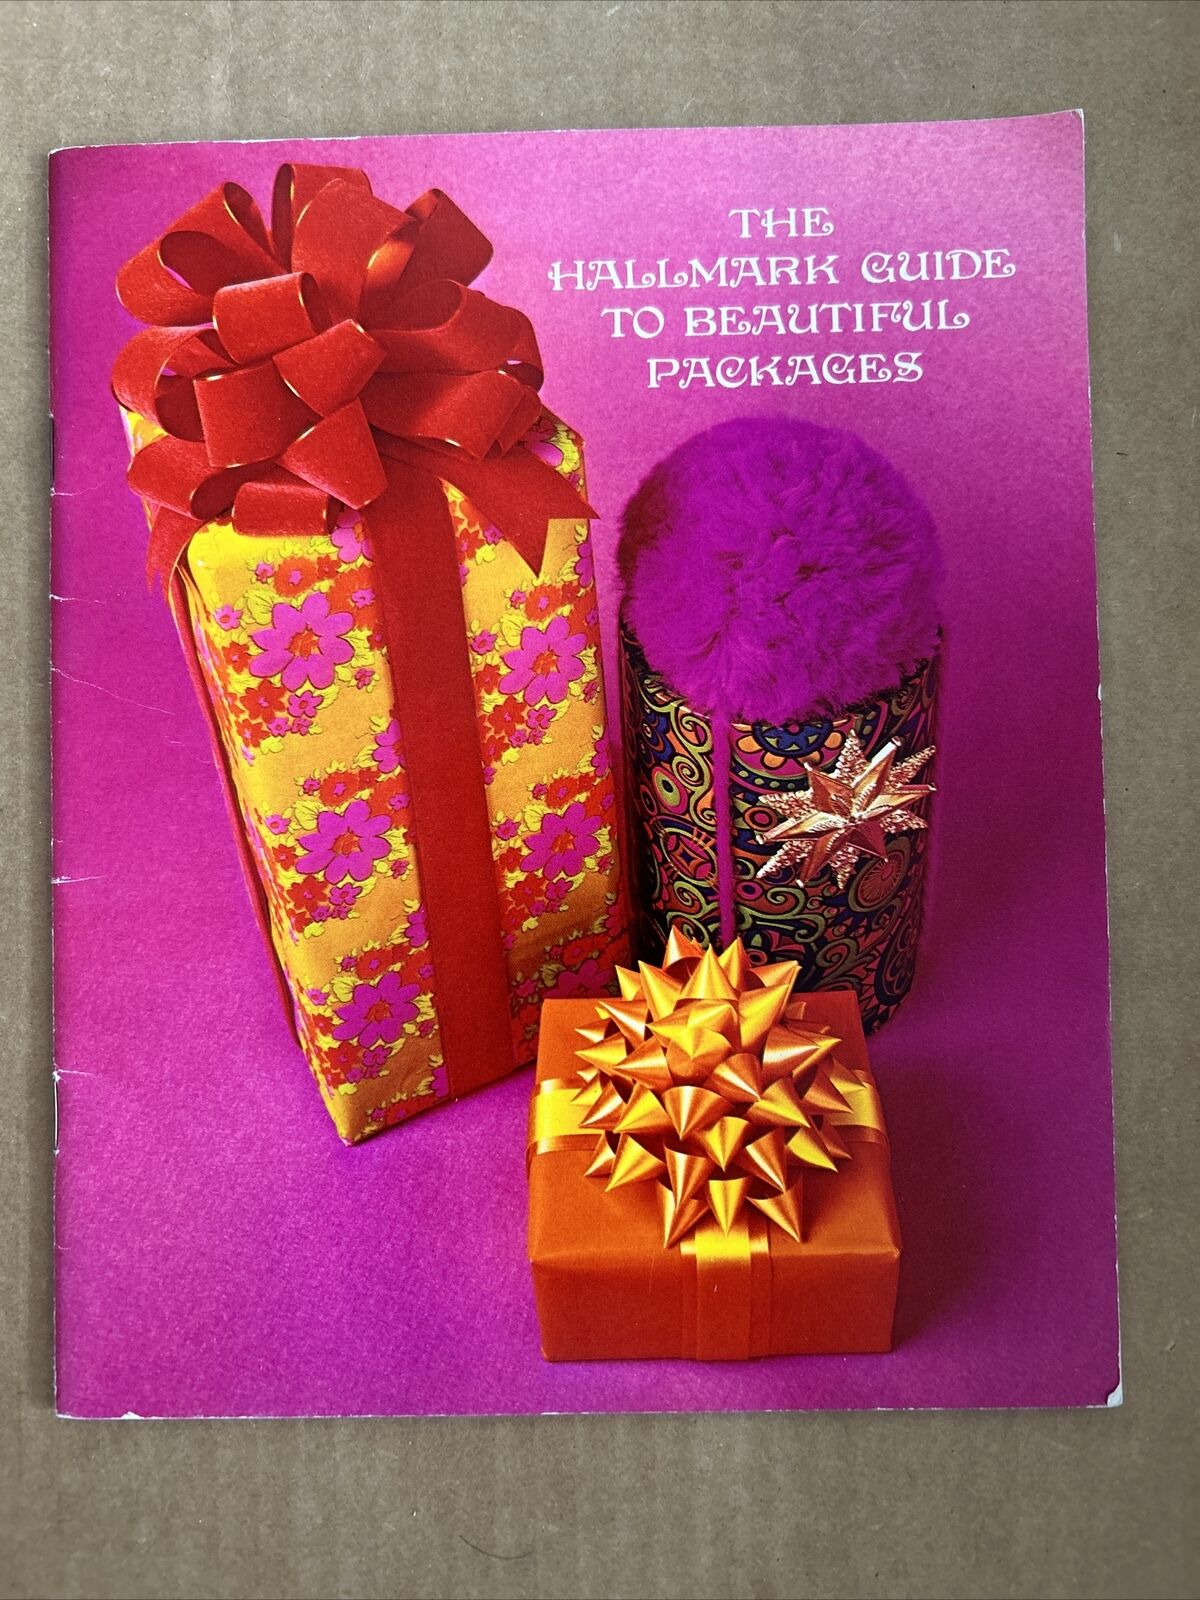 1969 The Hallmark Guide To beautiful packages